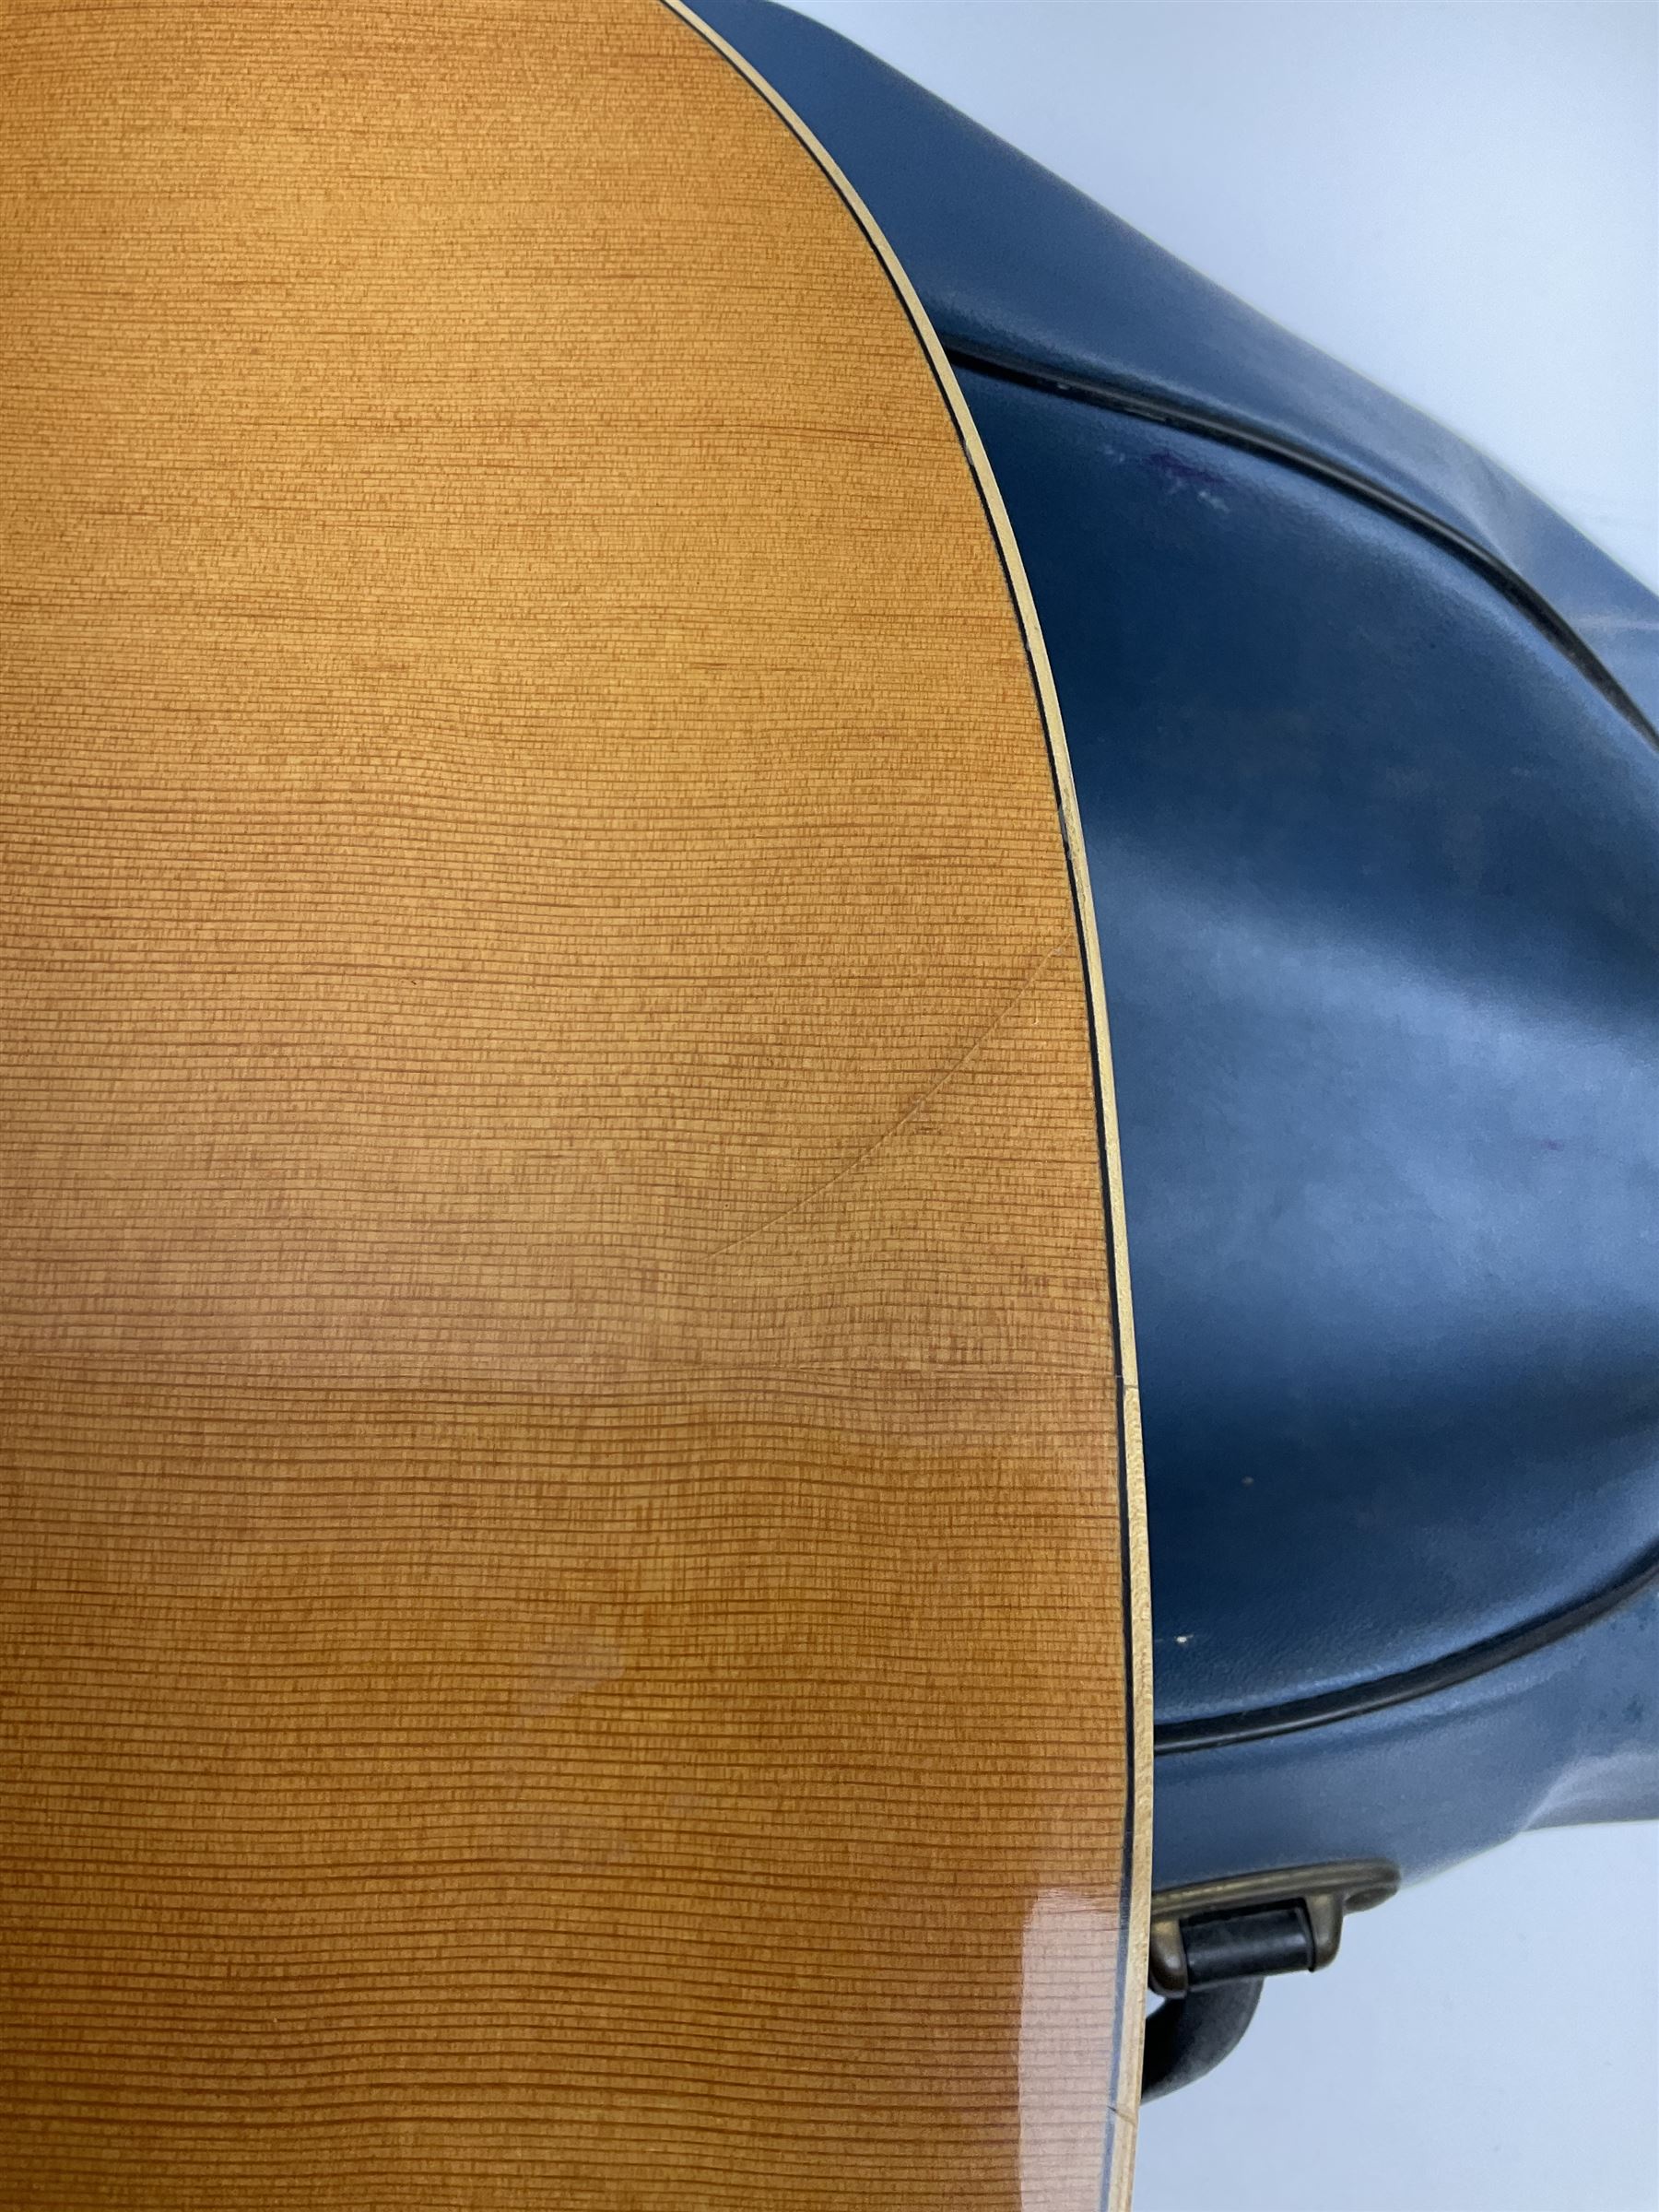 Spanish Concert Grande acoustic guitar with mahogany back and ribs and spruce top L100cm; in soft ca - Image 5 of 17